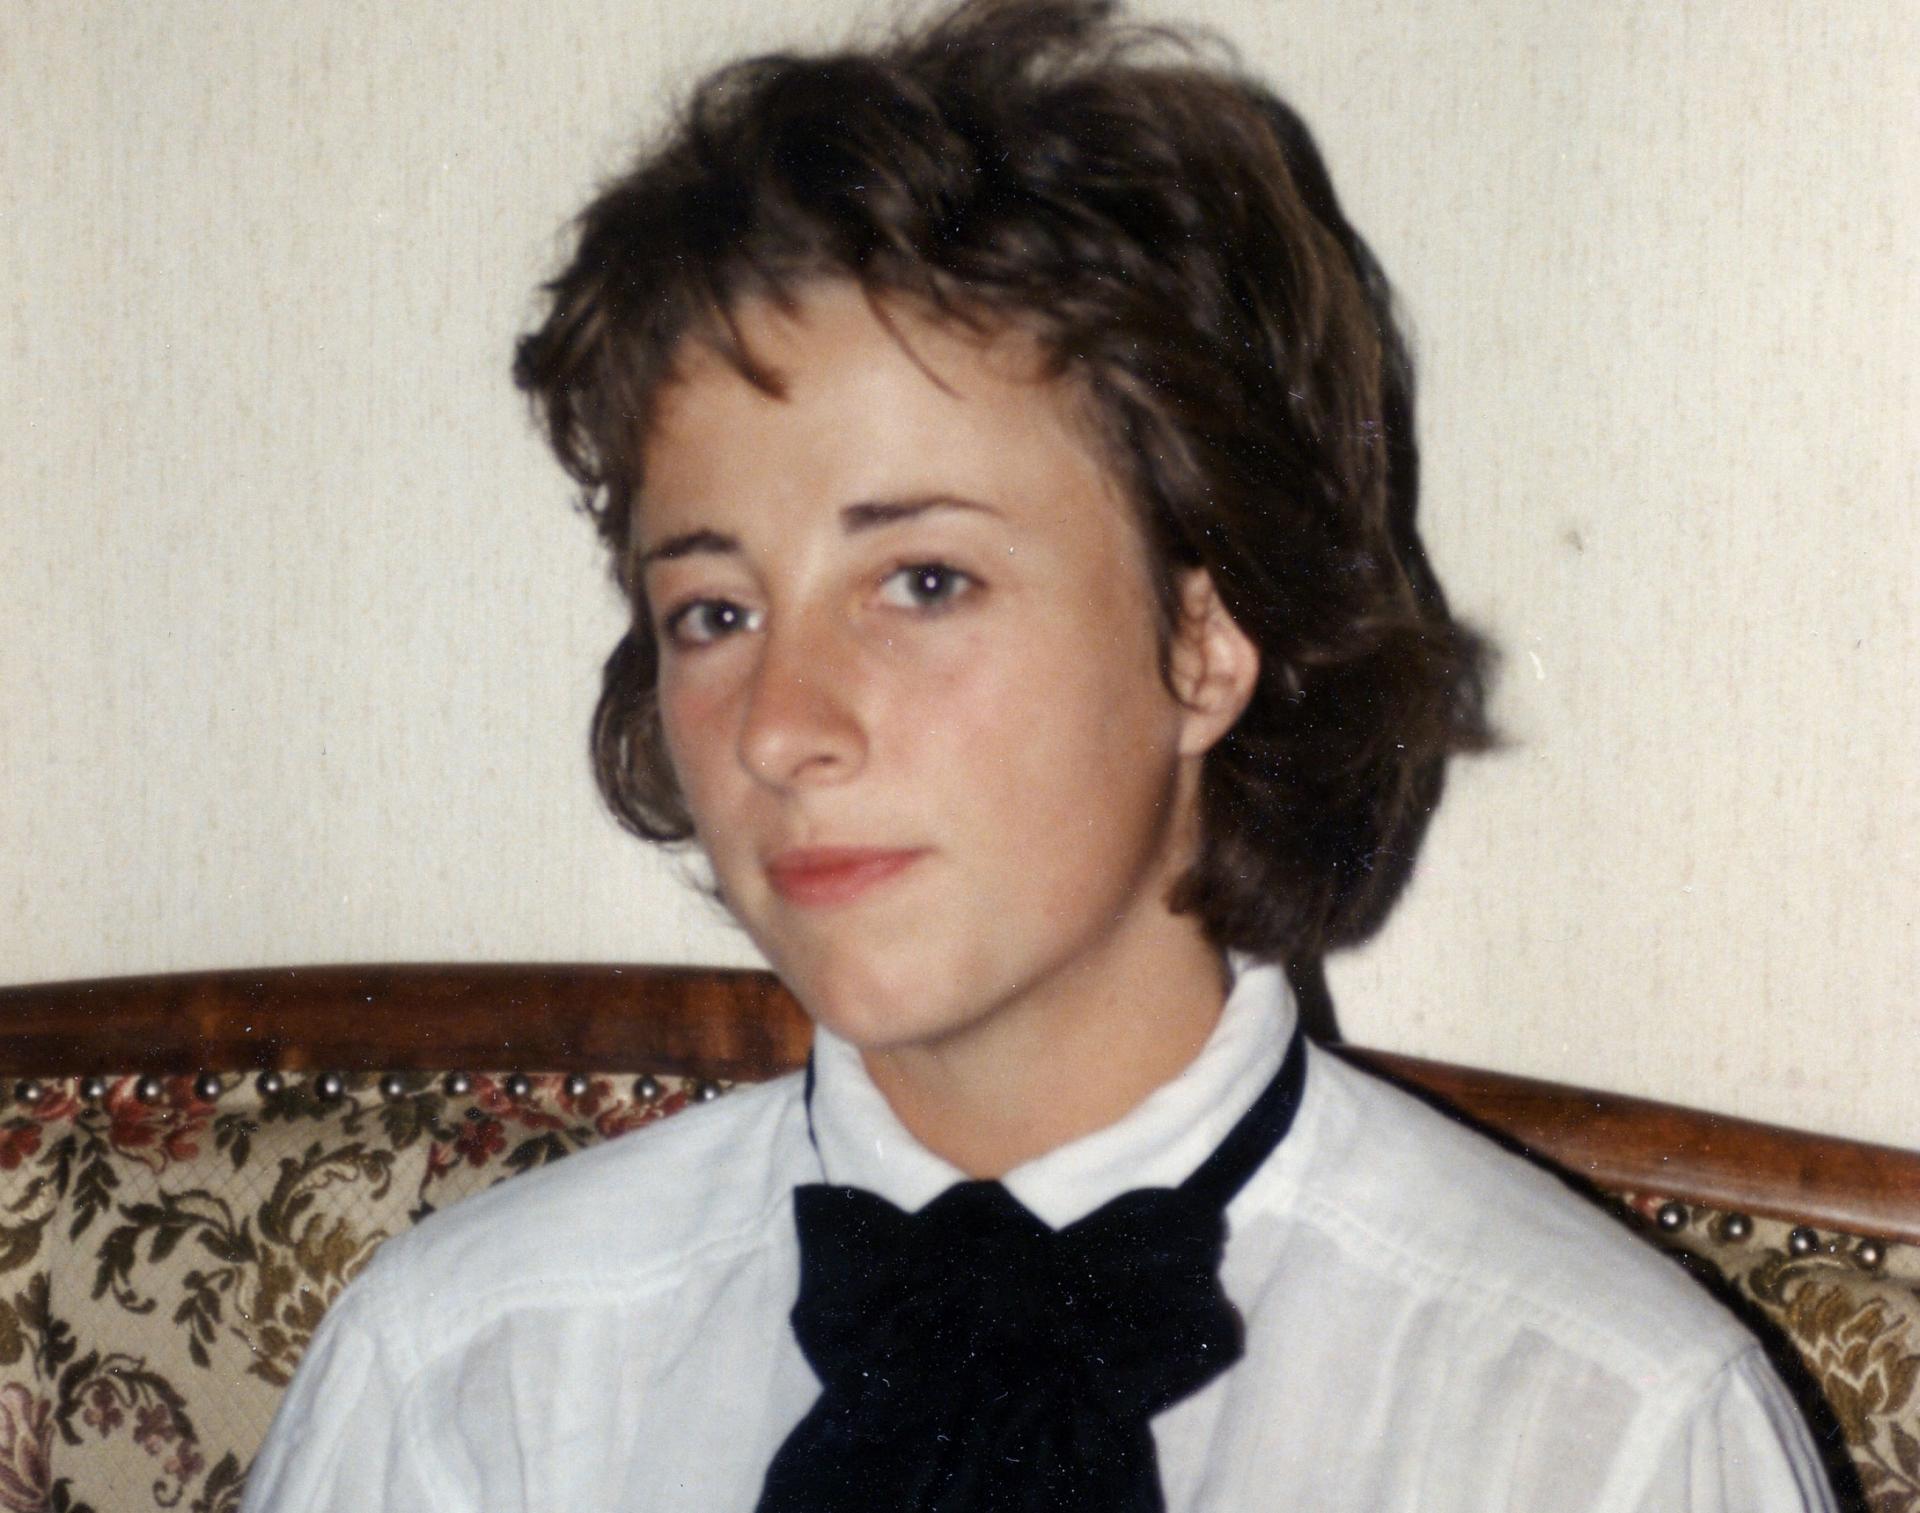 A portrait photo of Gabi Hayes in a white shirt and black tie.